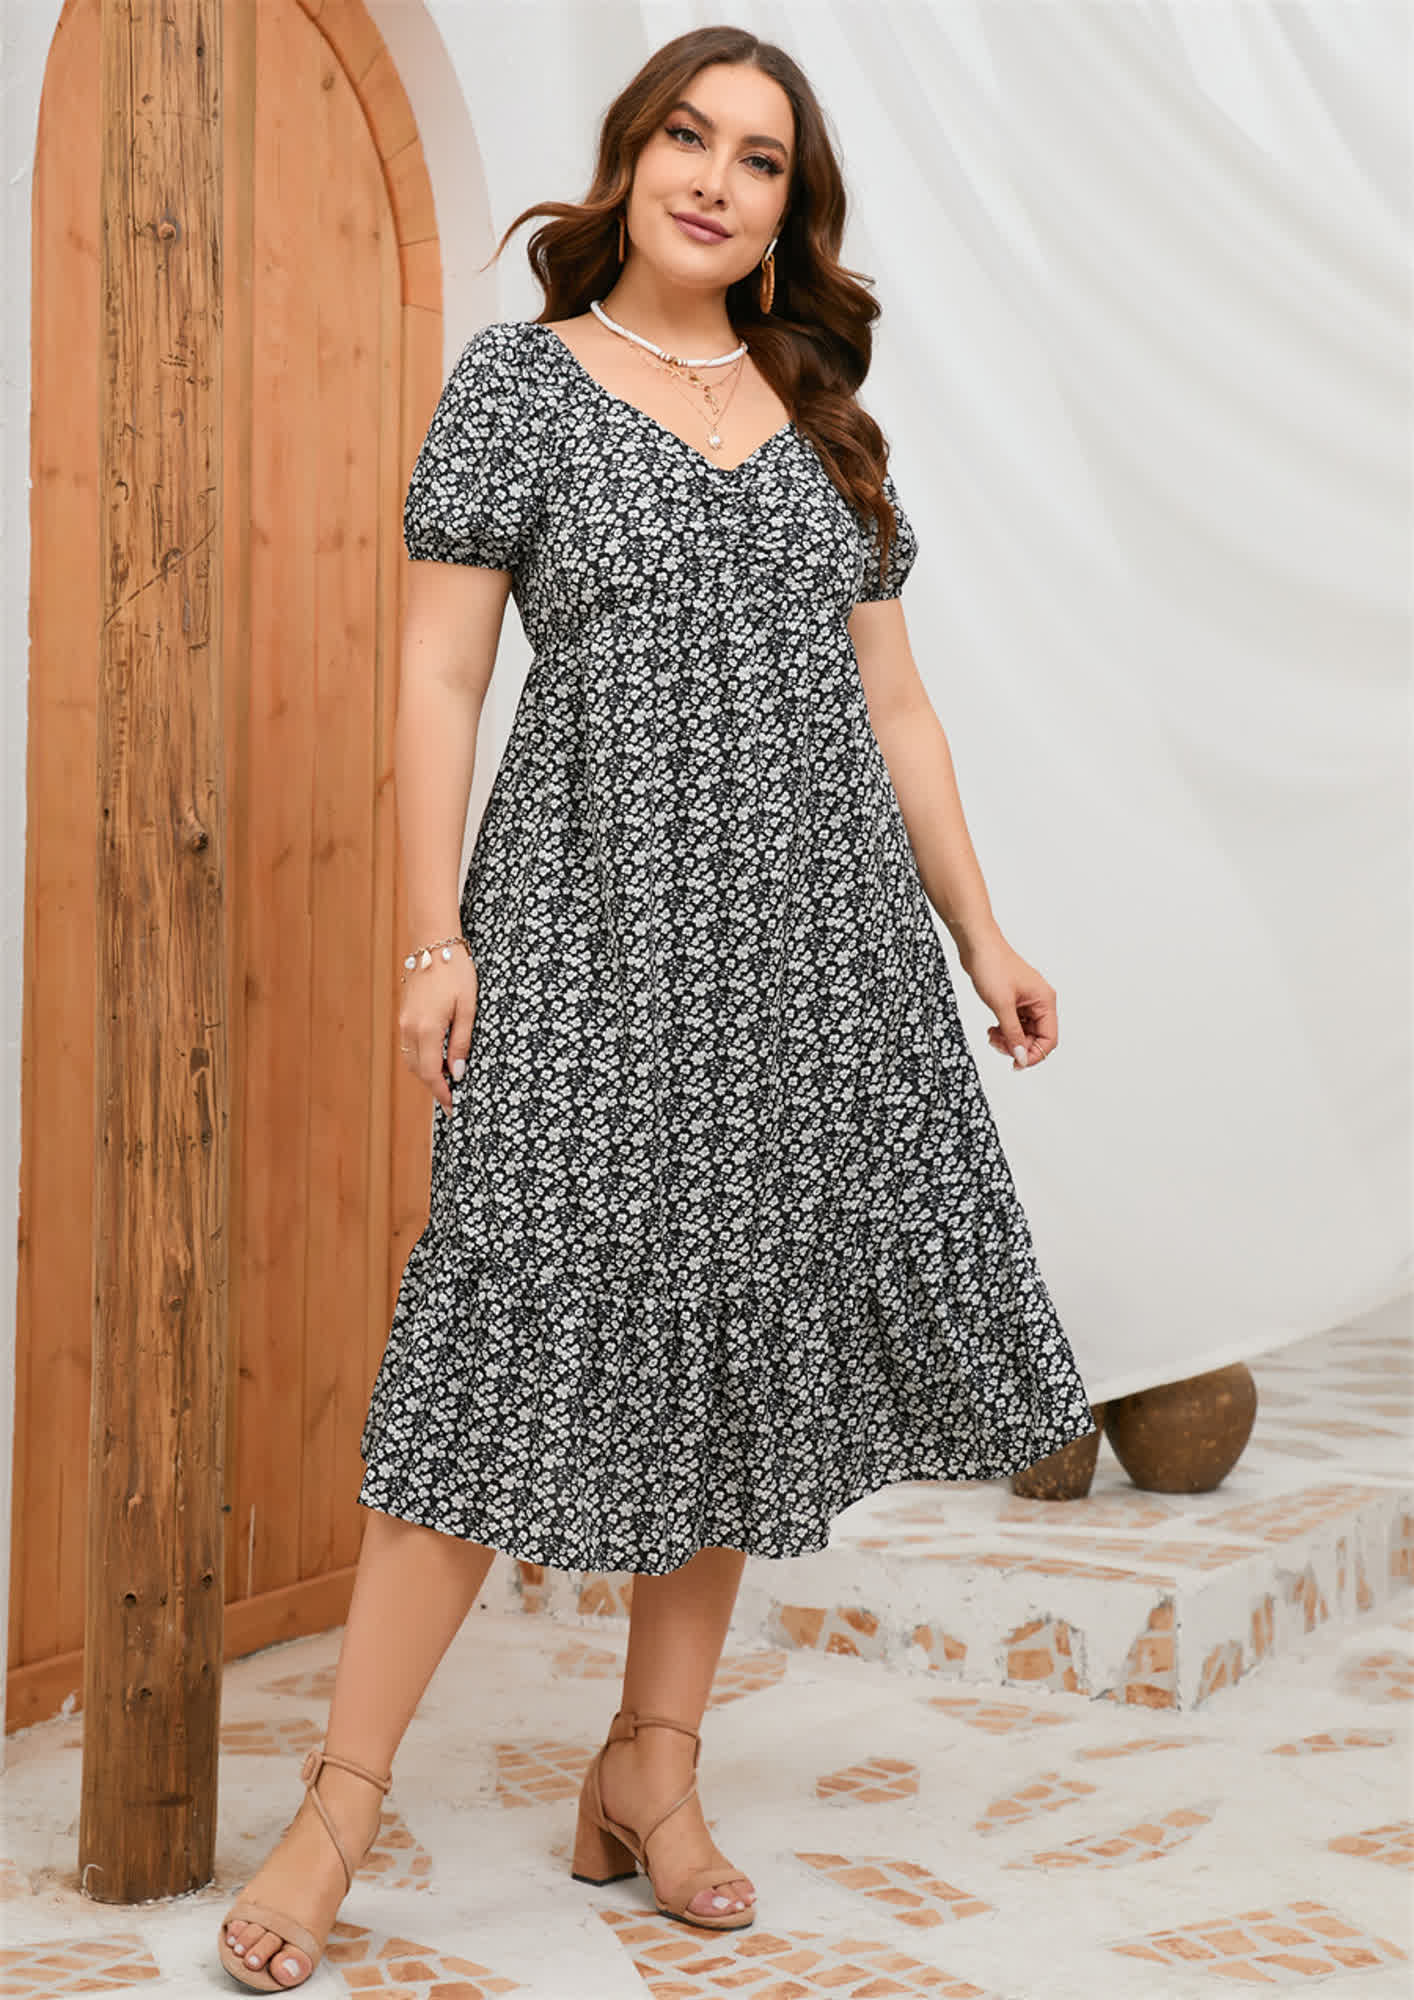 Plus Size Clothes - Buy Plus Size Clothes online in India